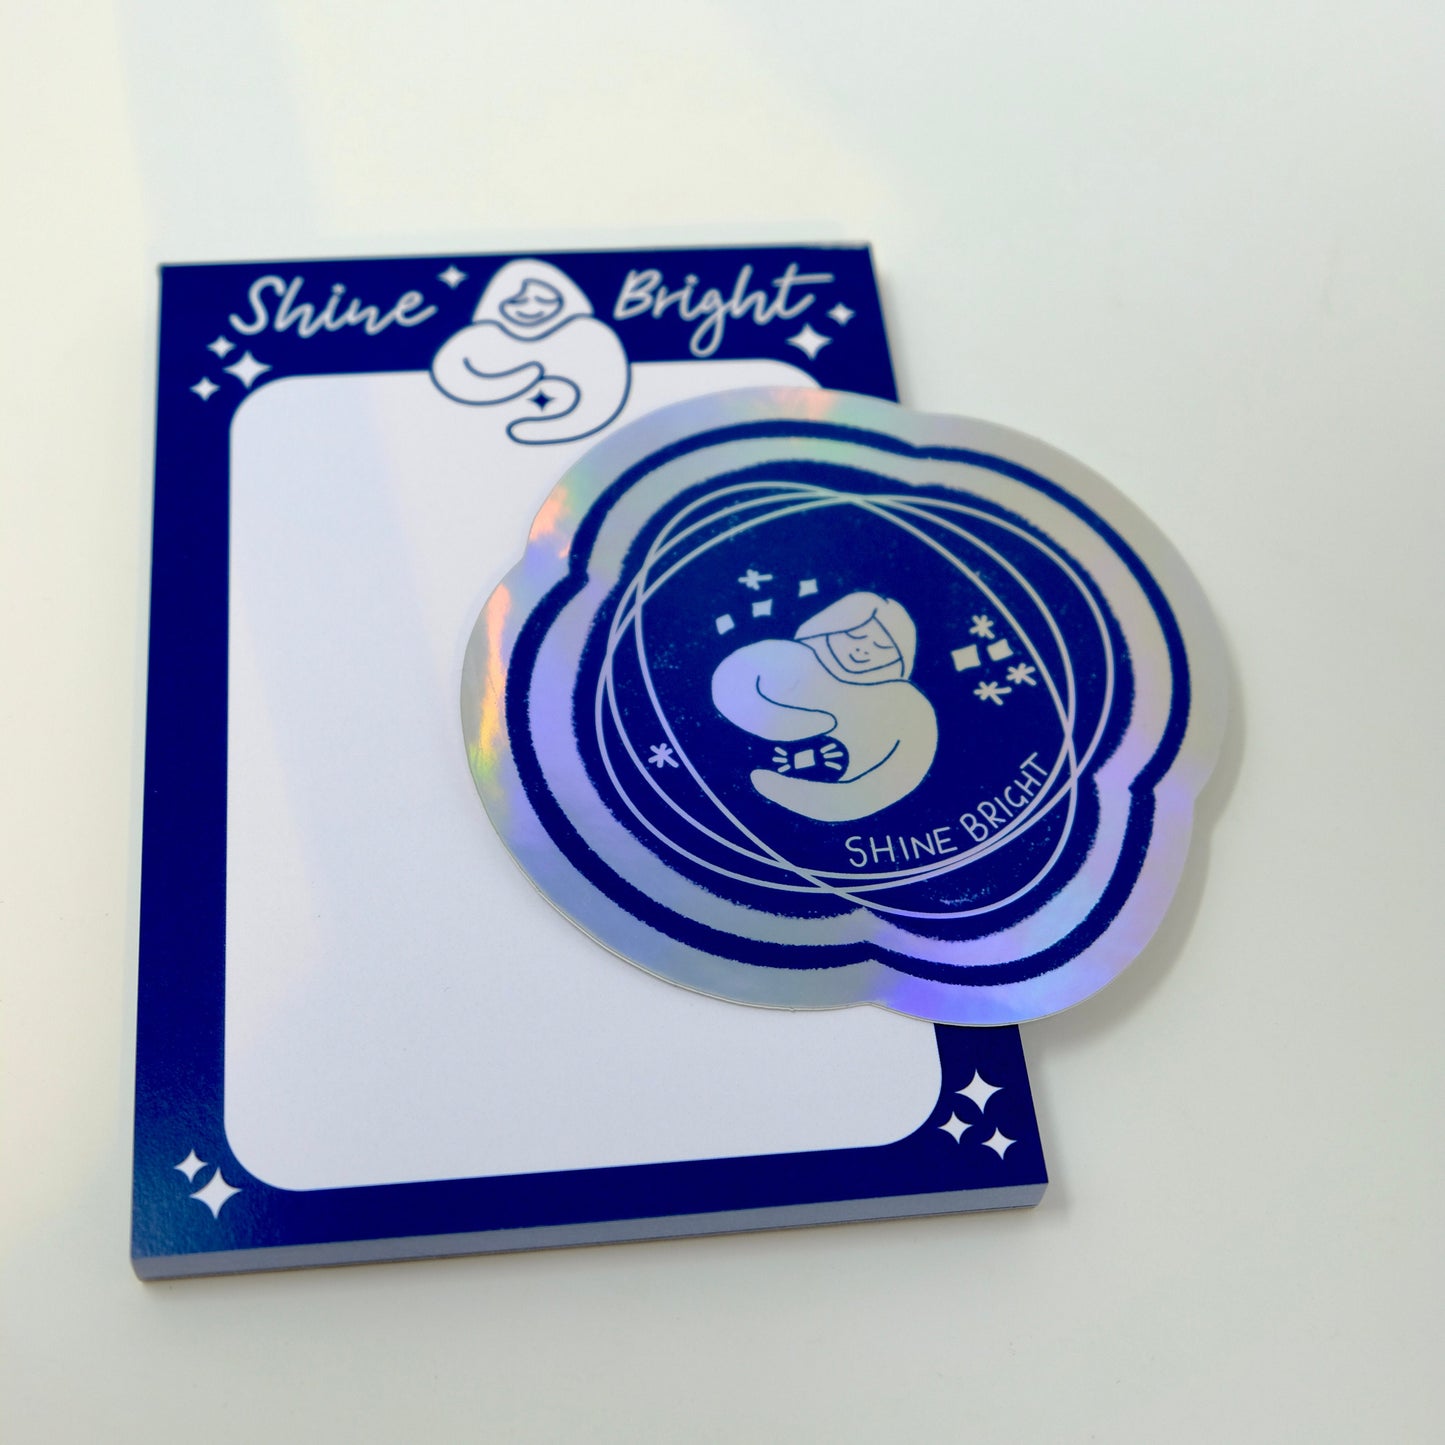 Shine Bright Gift Set - A6 Notepad and Holographic Sticker Gift Set - Celestial Stationary Gift Bundle